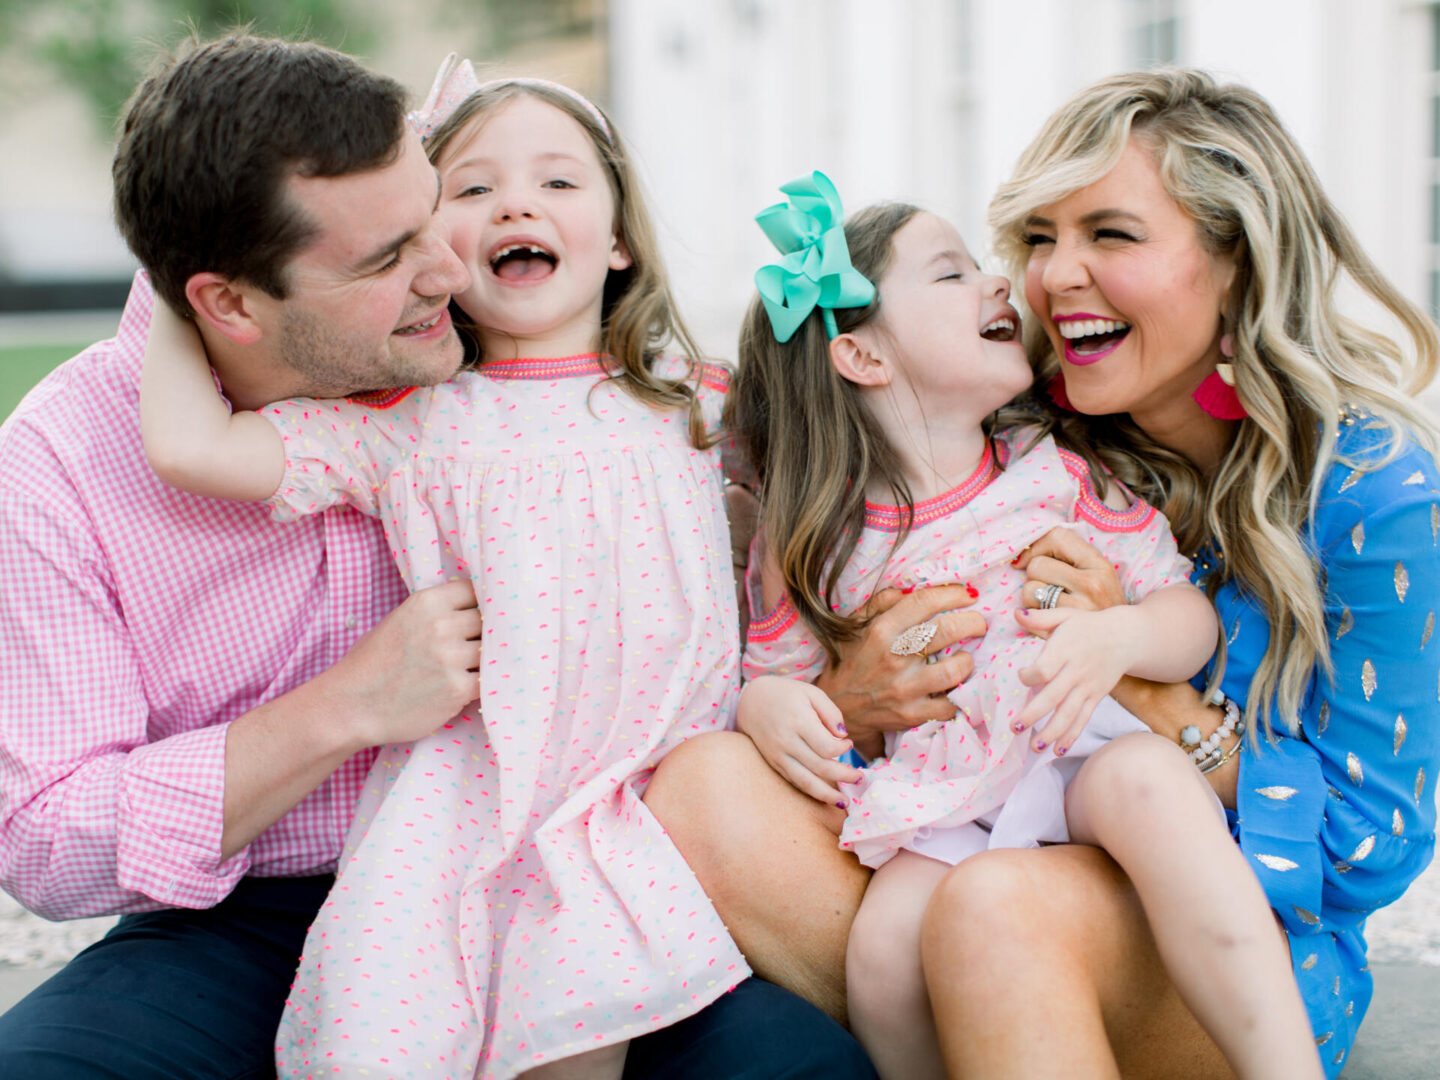 10 Year Wedding Anniversary by popular Nashville lifestyle blog, Hello Happiness: image of a mom and dad and their two young daughters sitting together. 